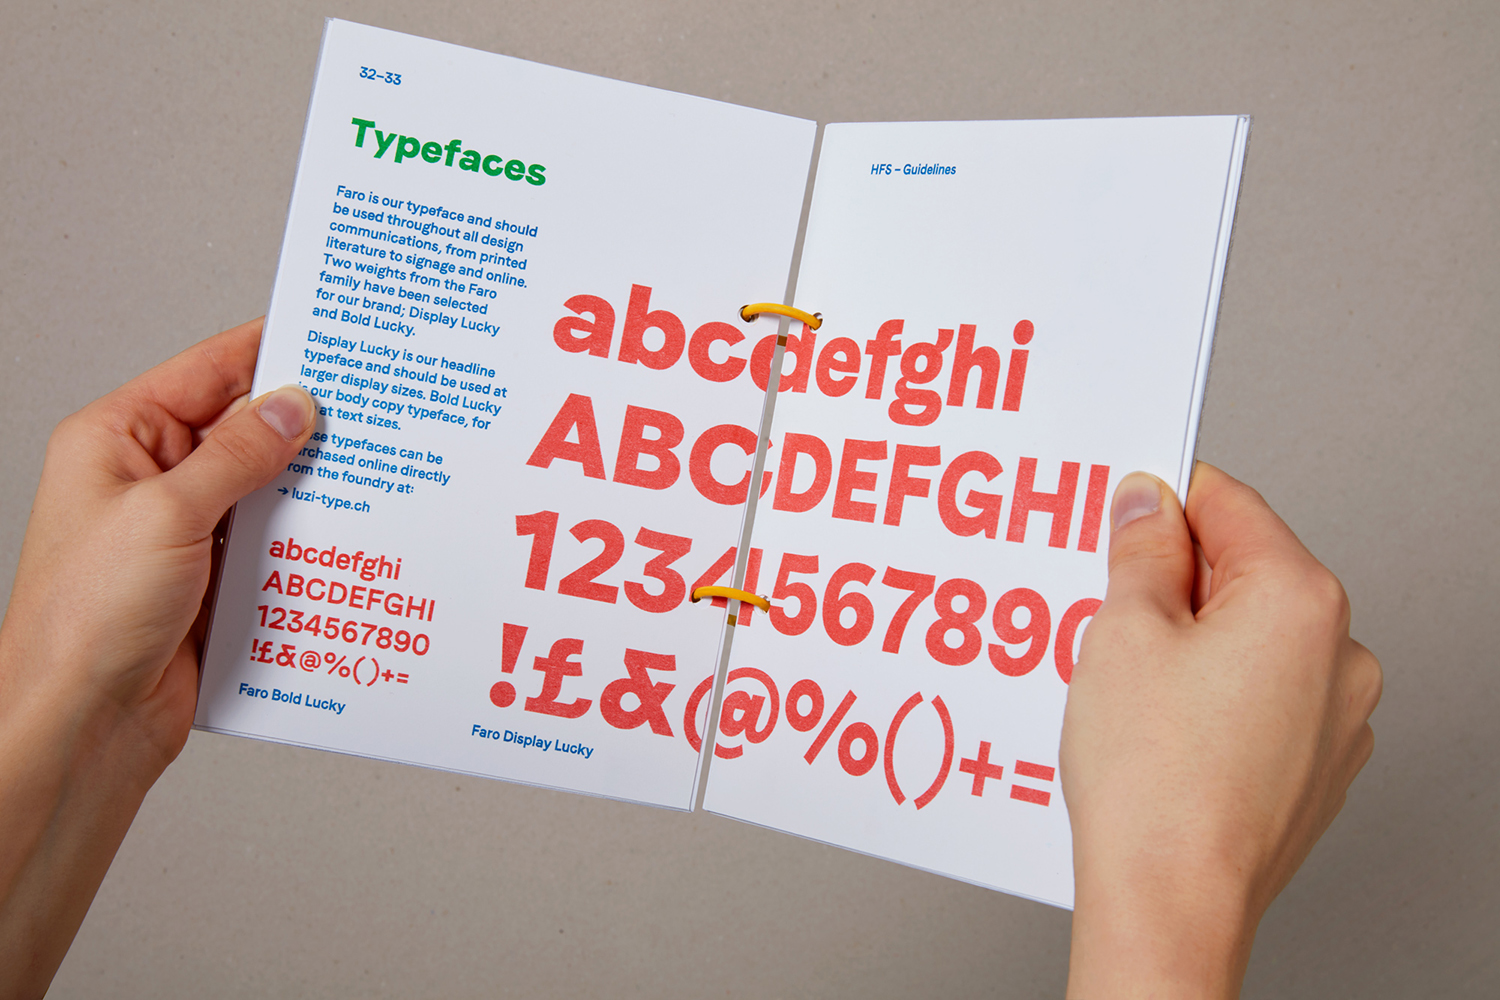 Visual identity and brand book designed by Spy for Hackney Forest School